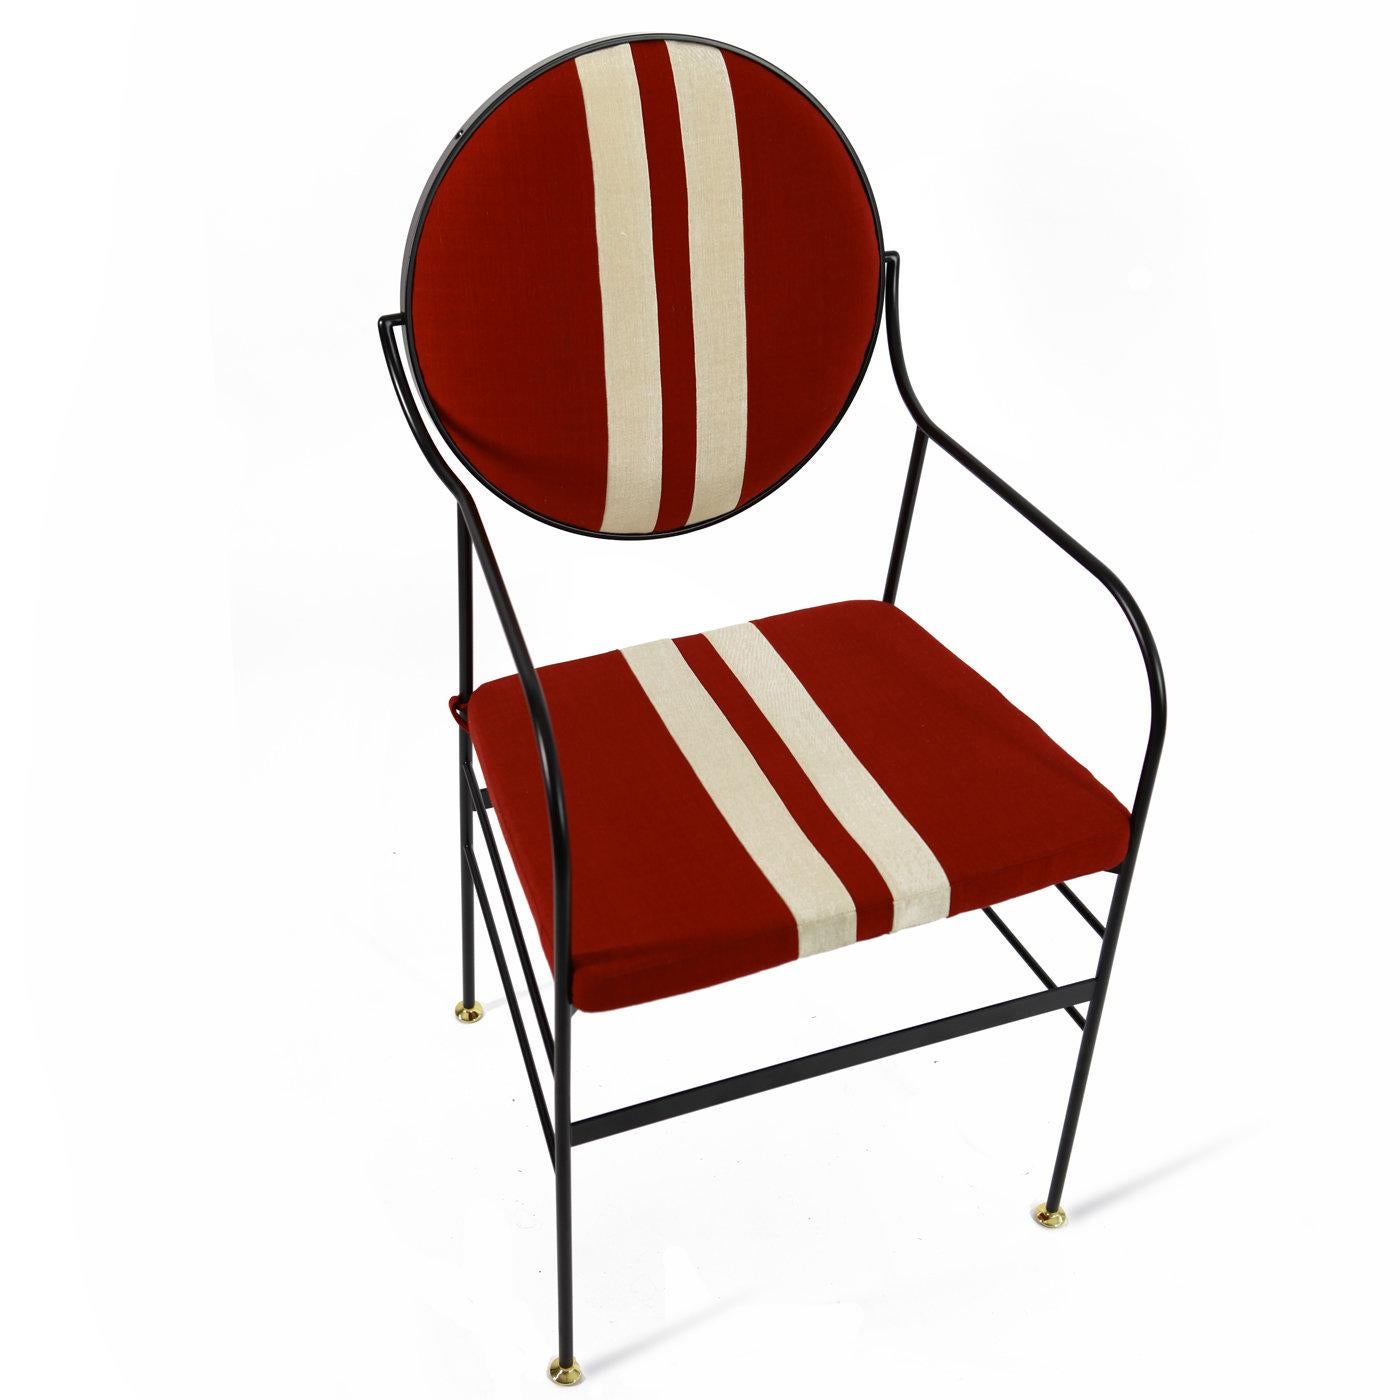 Red/White Sport Stripe chair
In Stock in Los Angeles
Note: Please see last 4 images to see the actual product.

This striking chair is in iron with brass feet. The iron is dust painted and oven finished, while the back can rotate on its structure to